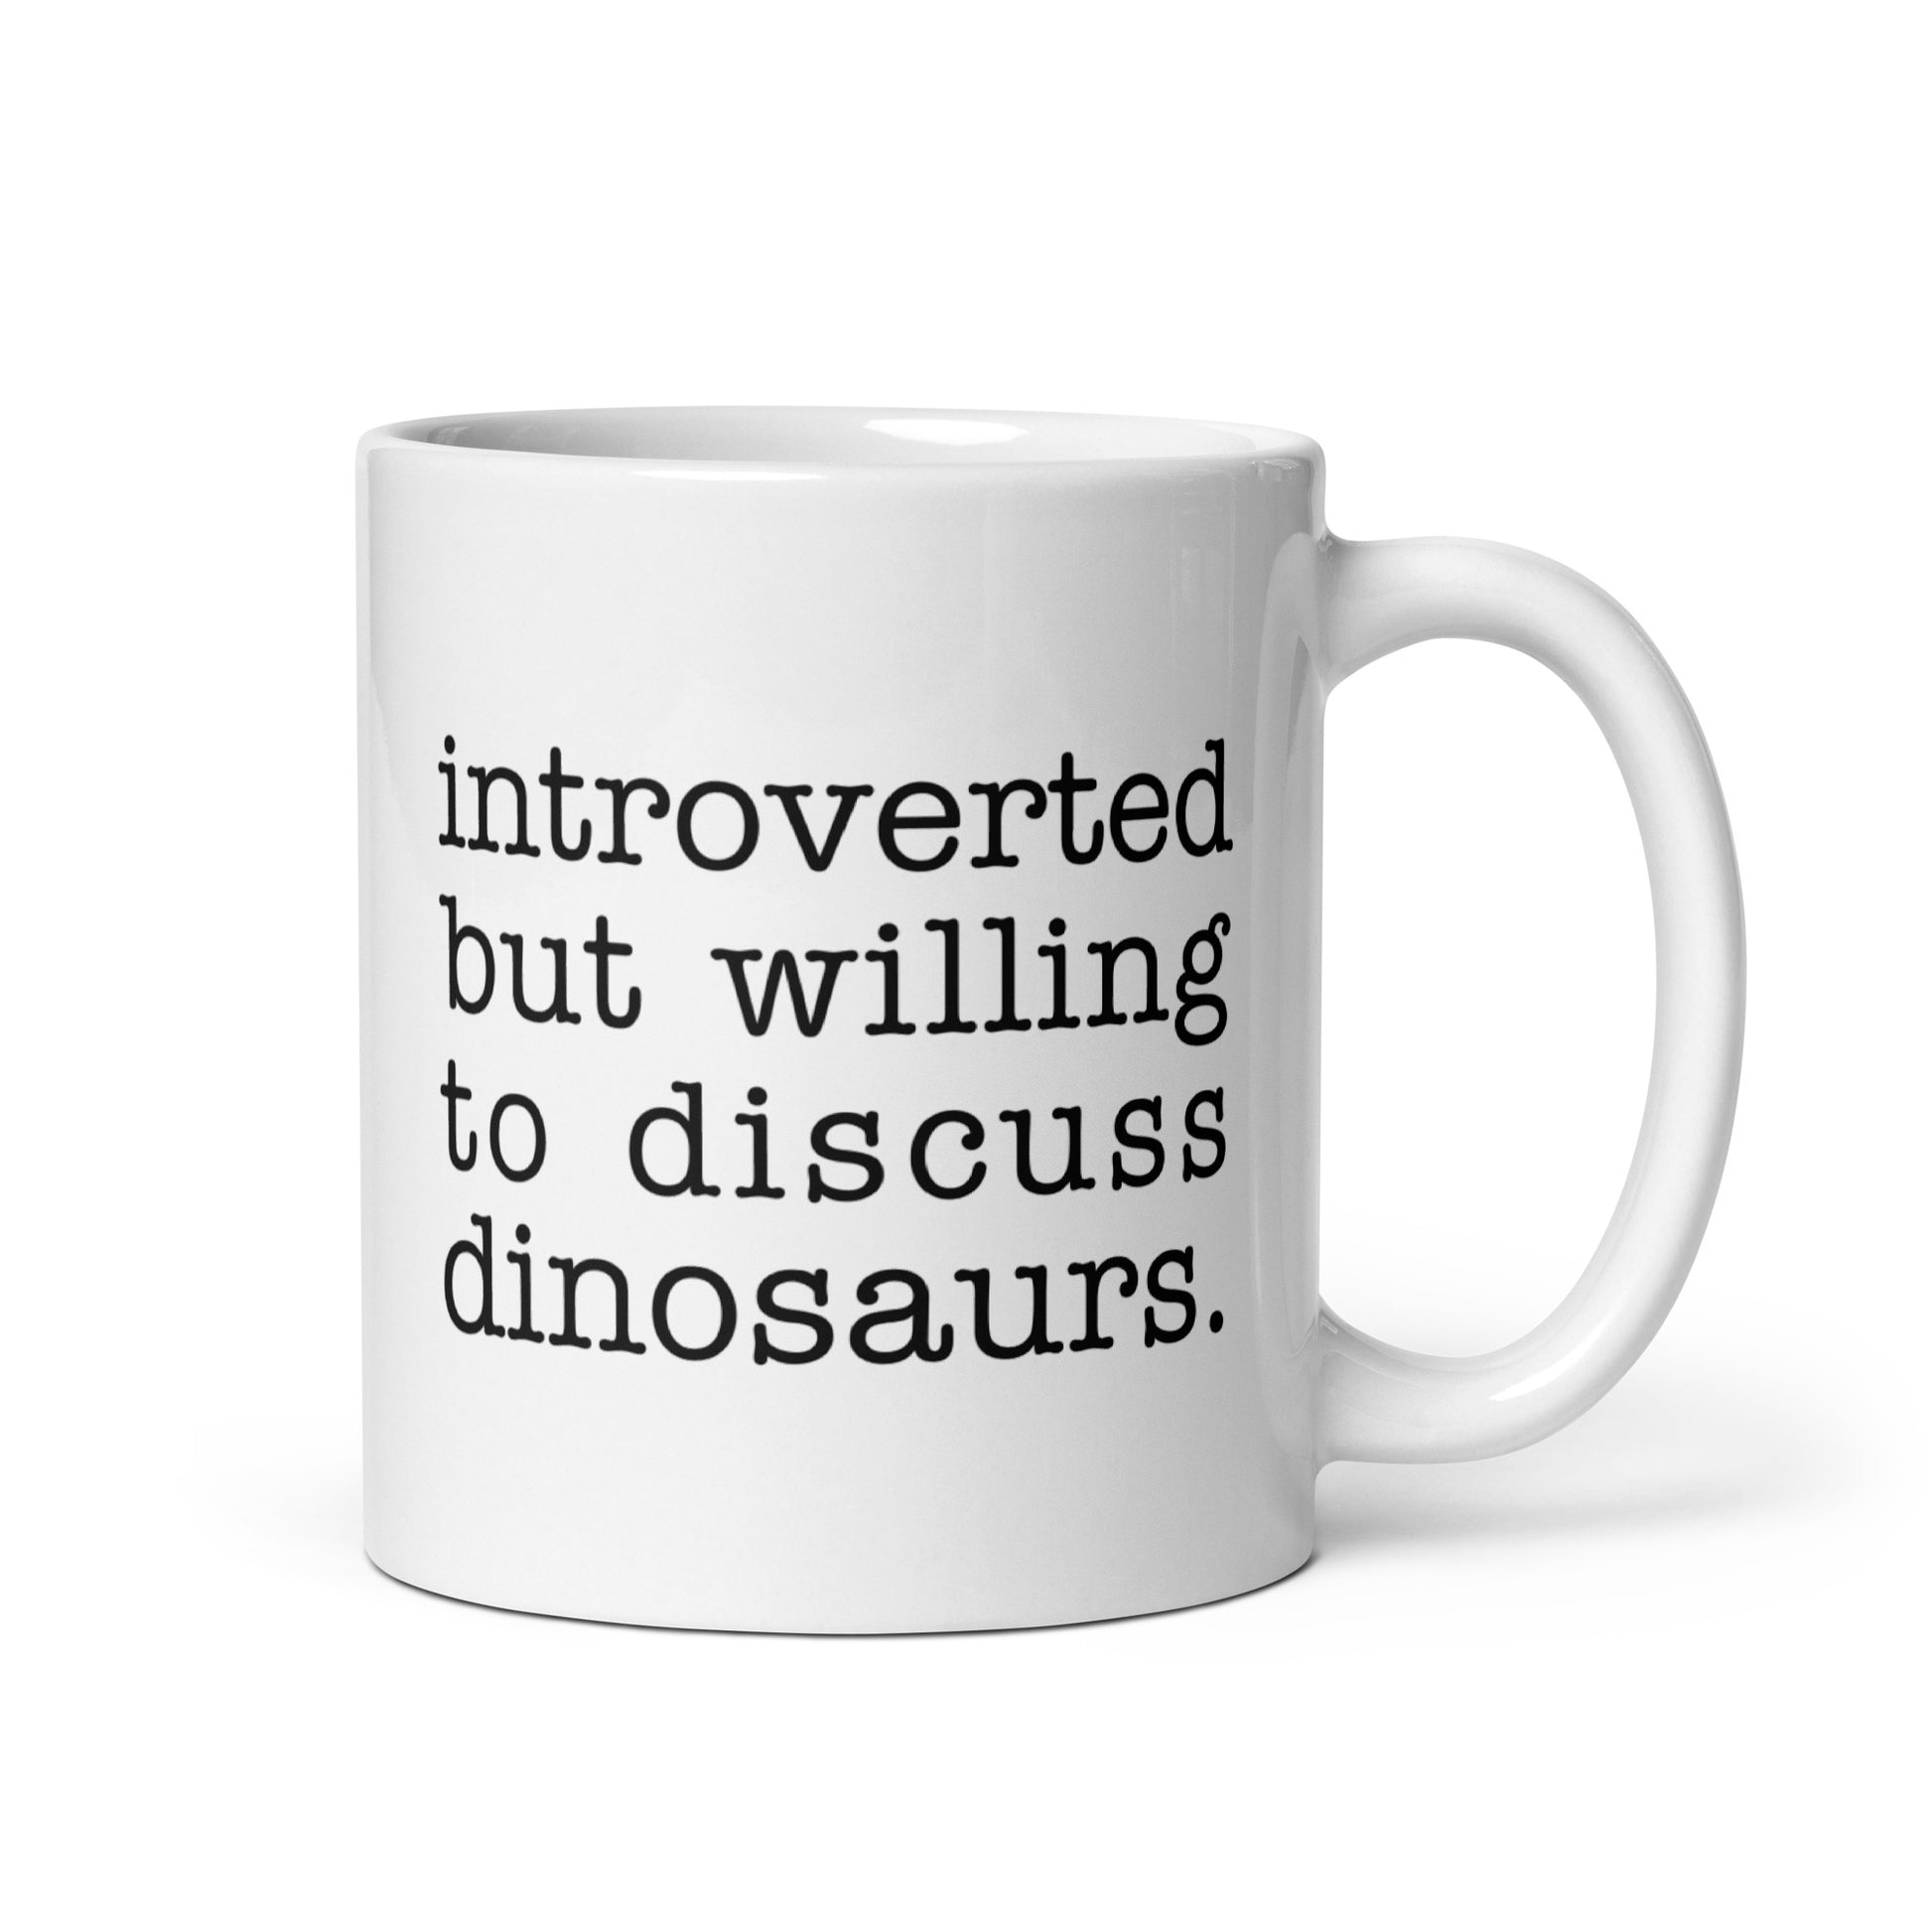 A white 11 ounce ceramic mug with text reading "introverted but willing to discuss dinosaurs"